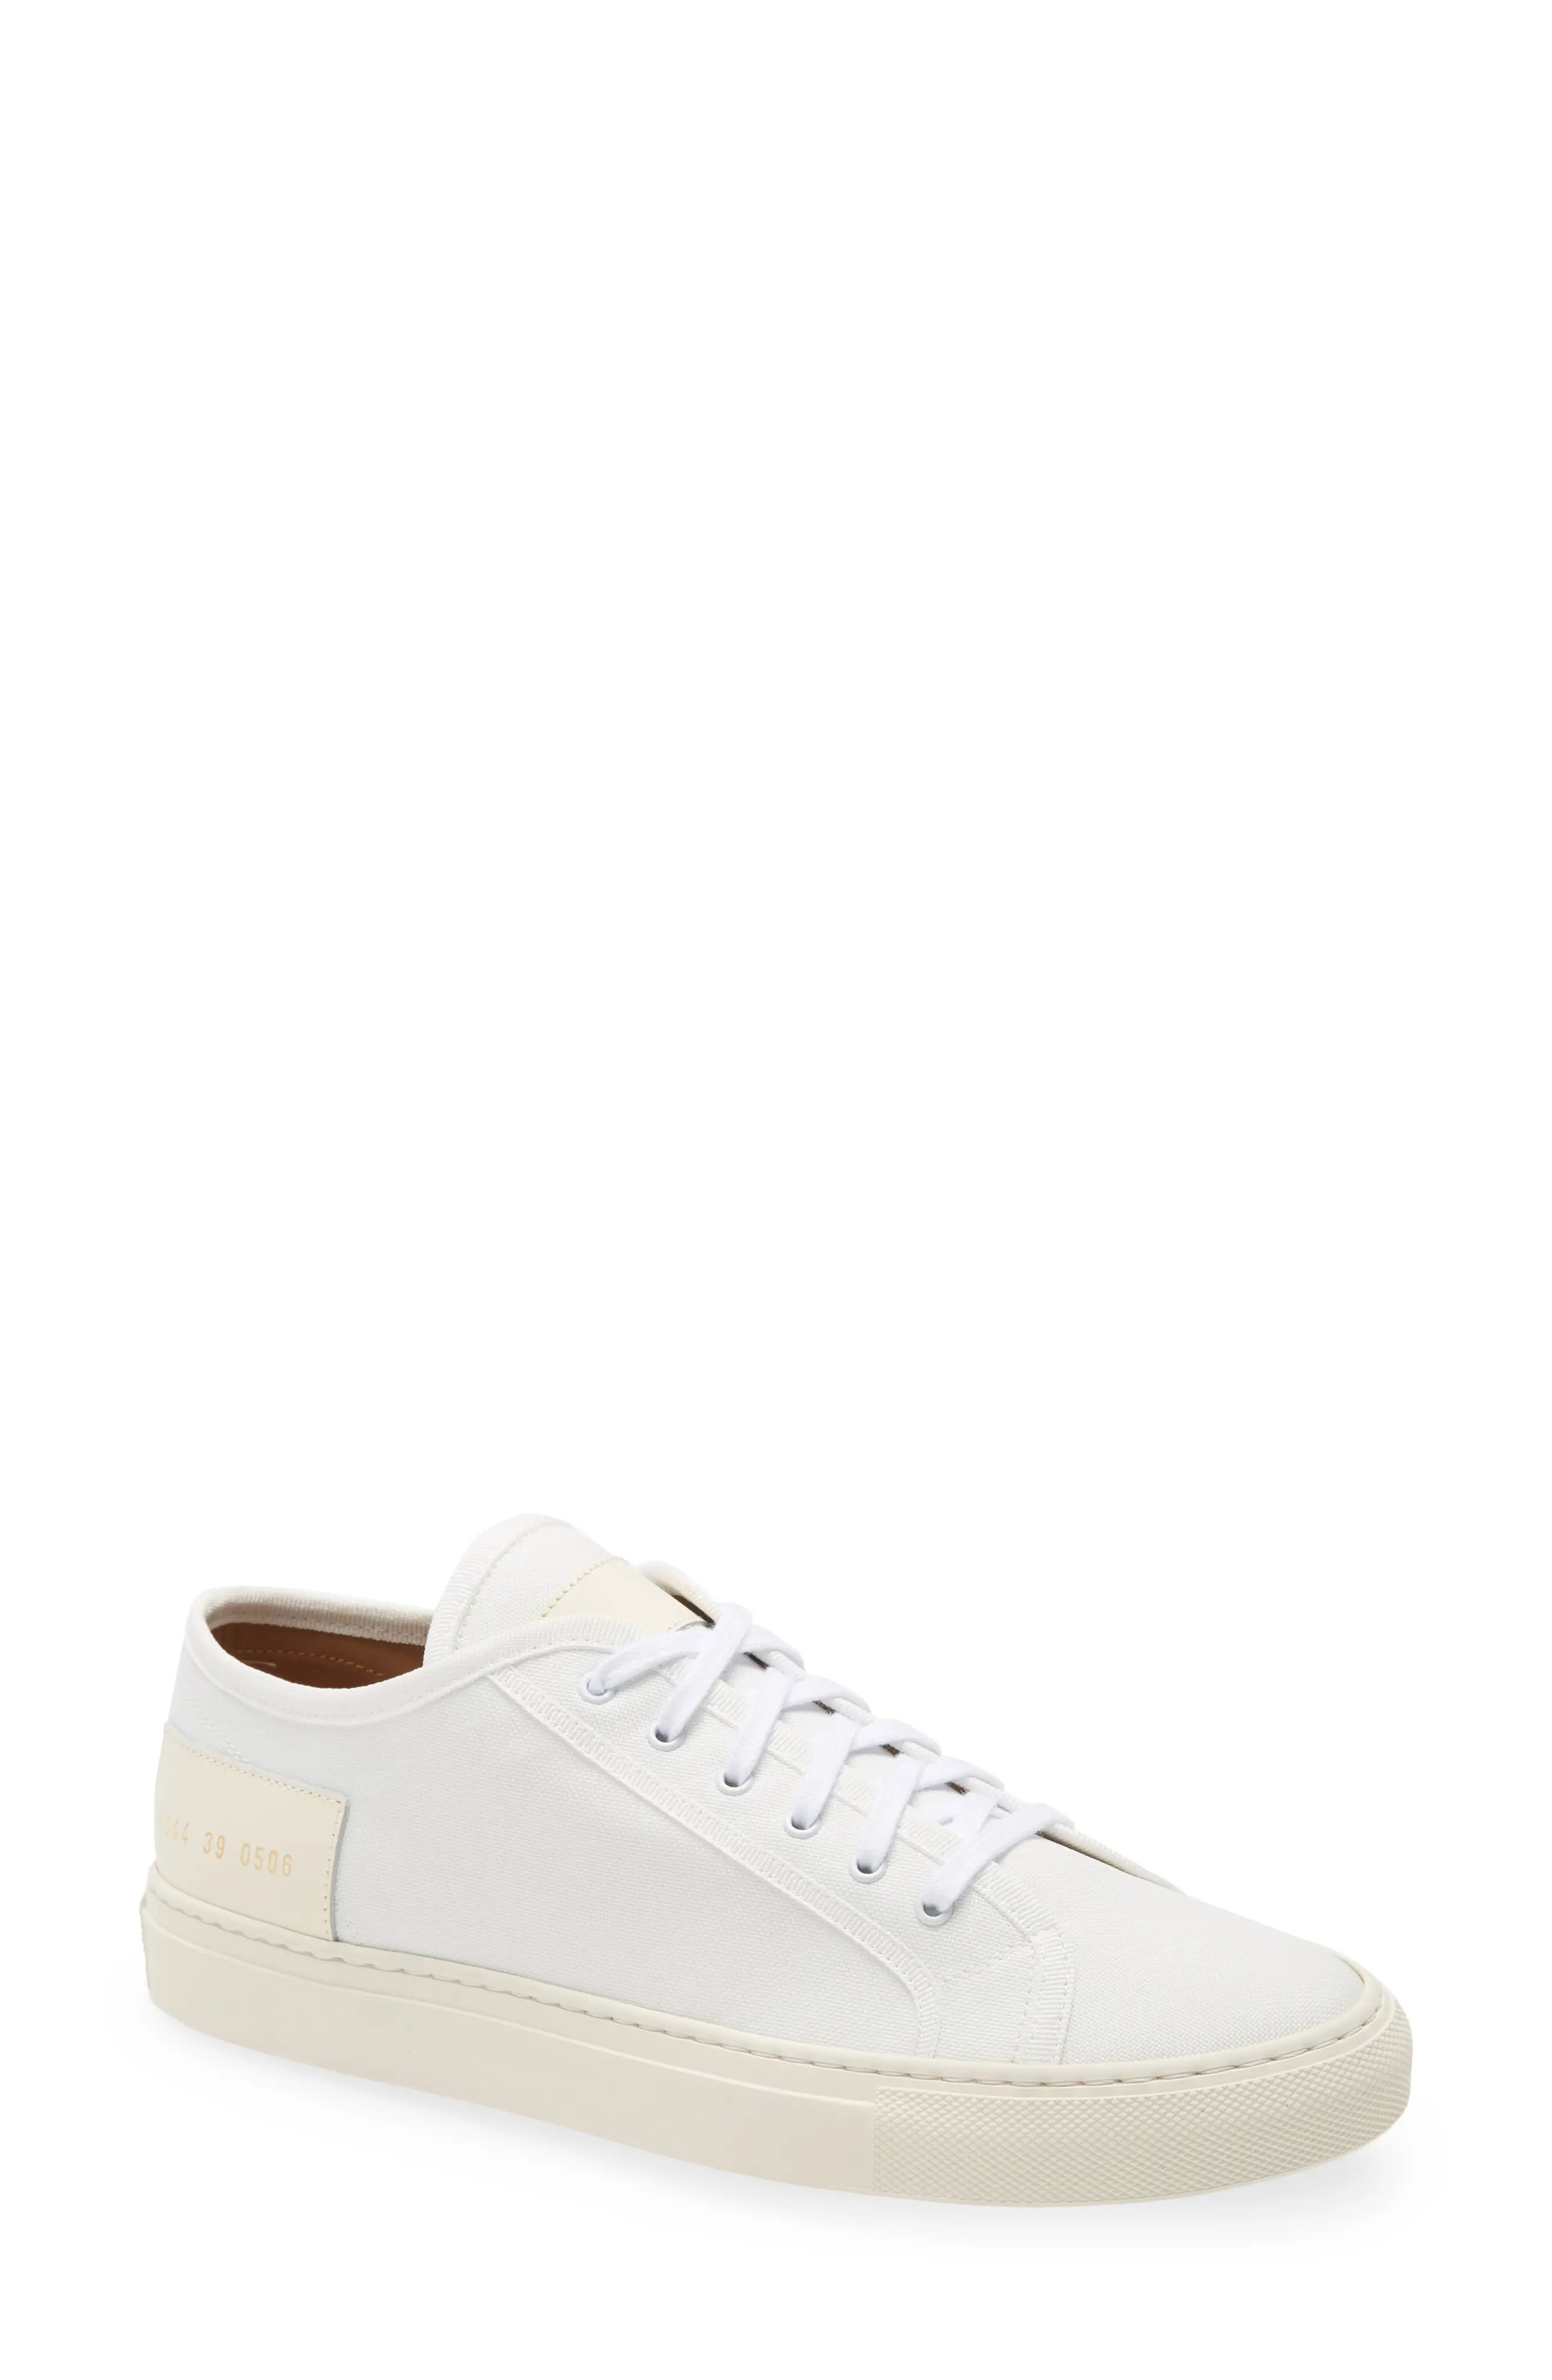 Common Projects Tournament Low Recycled Nylon Sneaker in White/Natural at Nordstrom, Size 8Us | Nordstrom